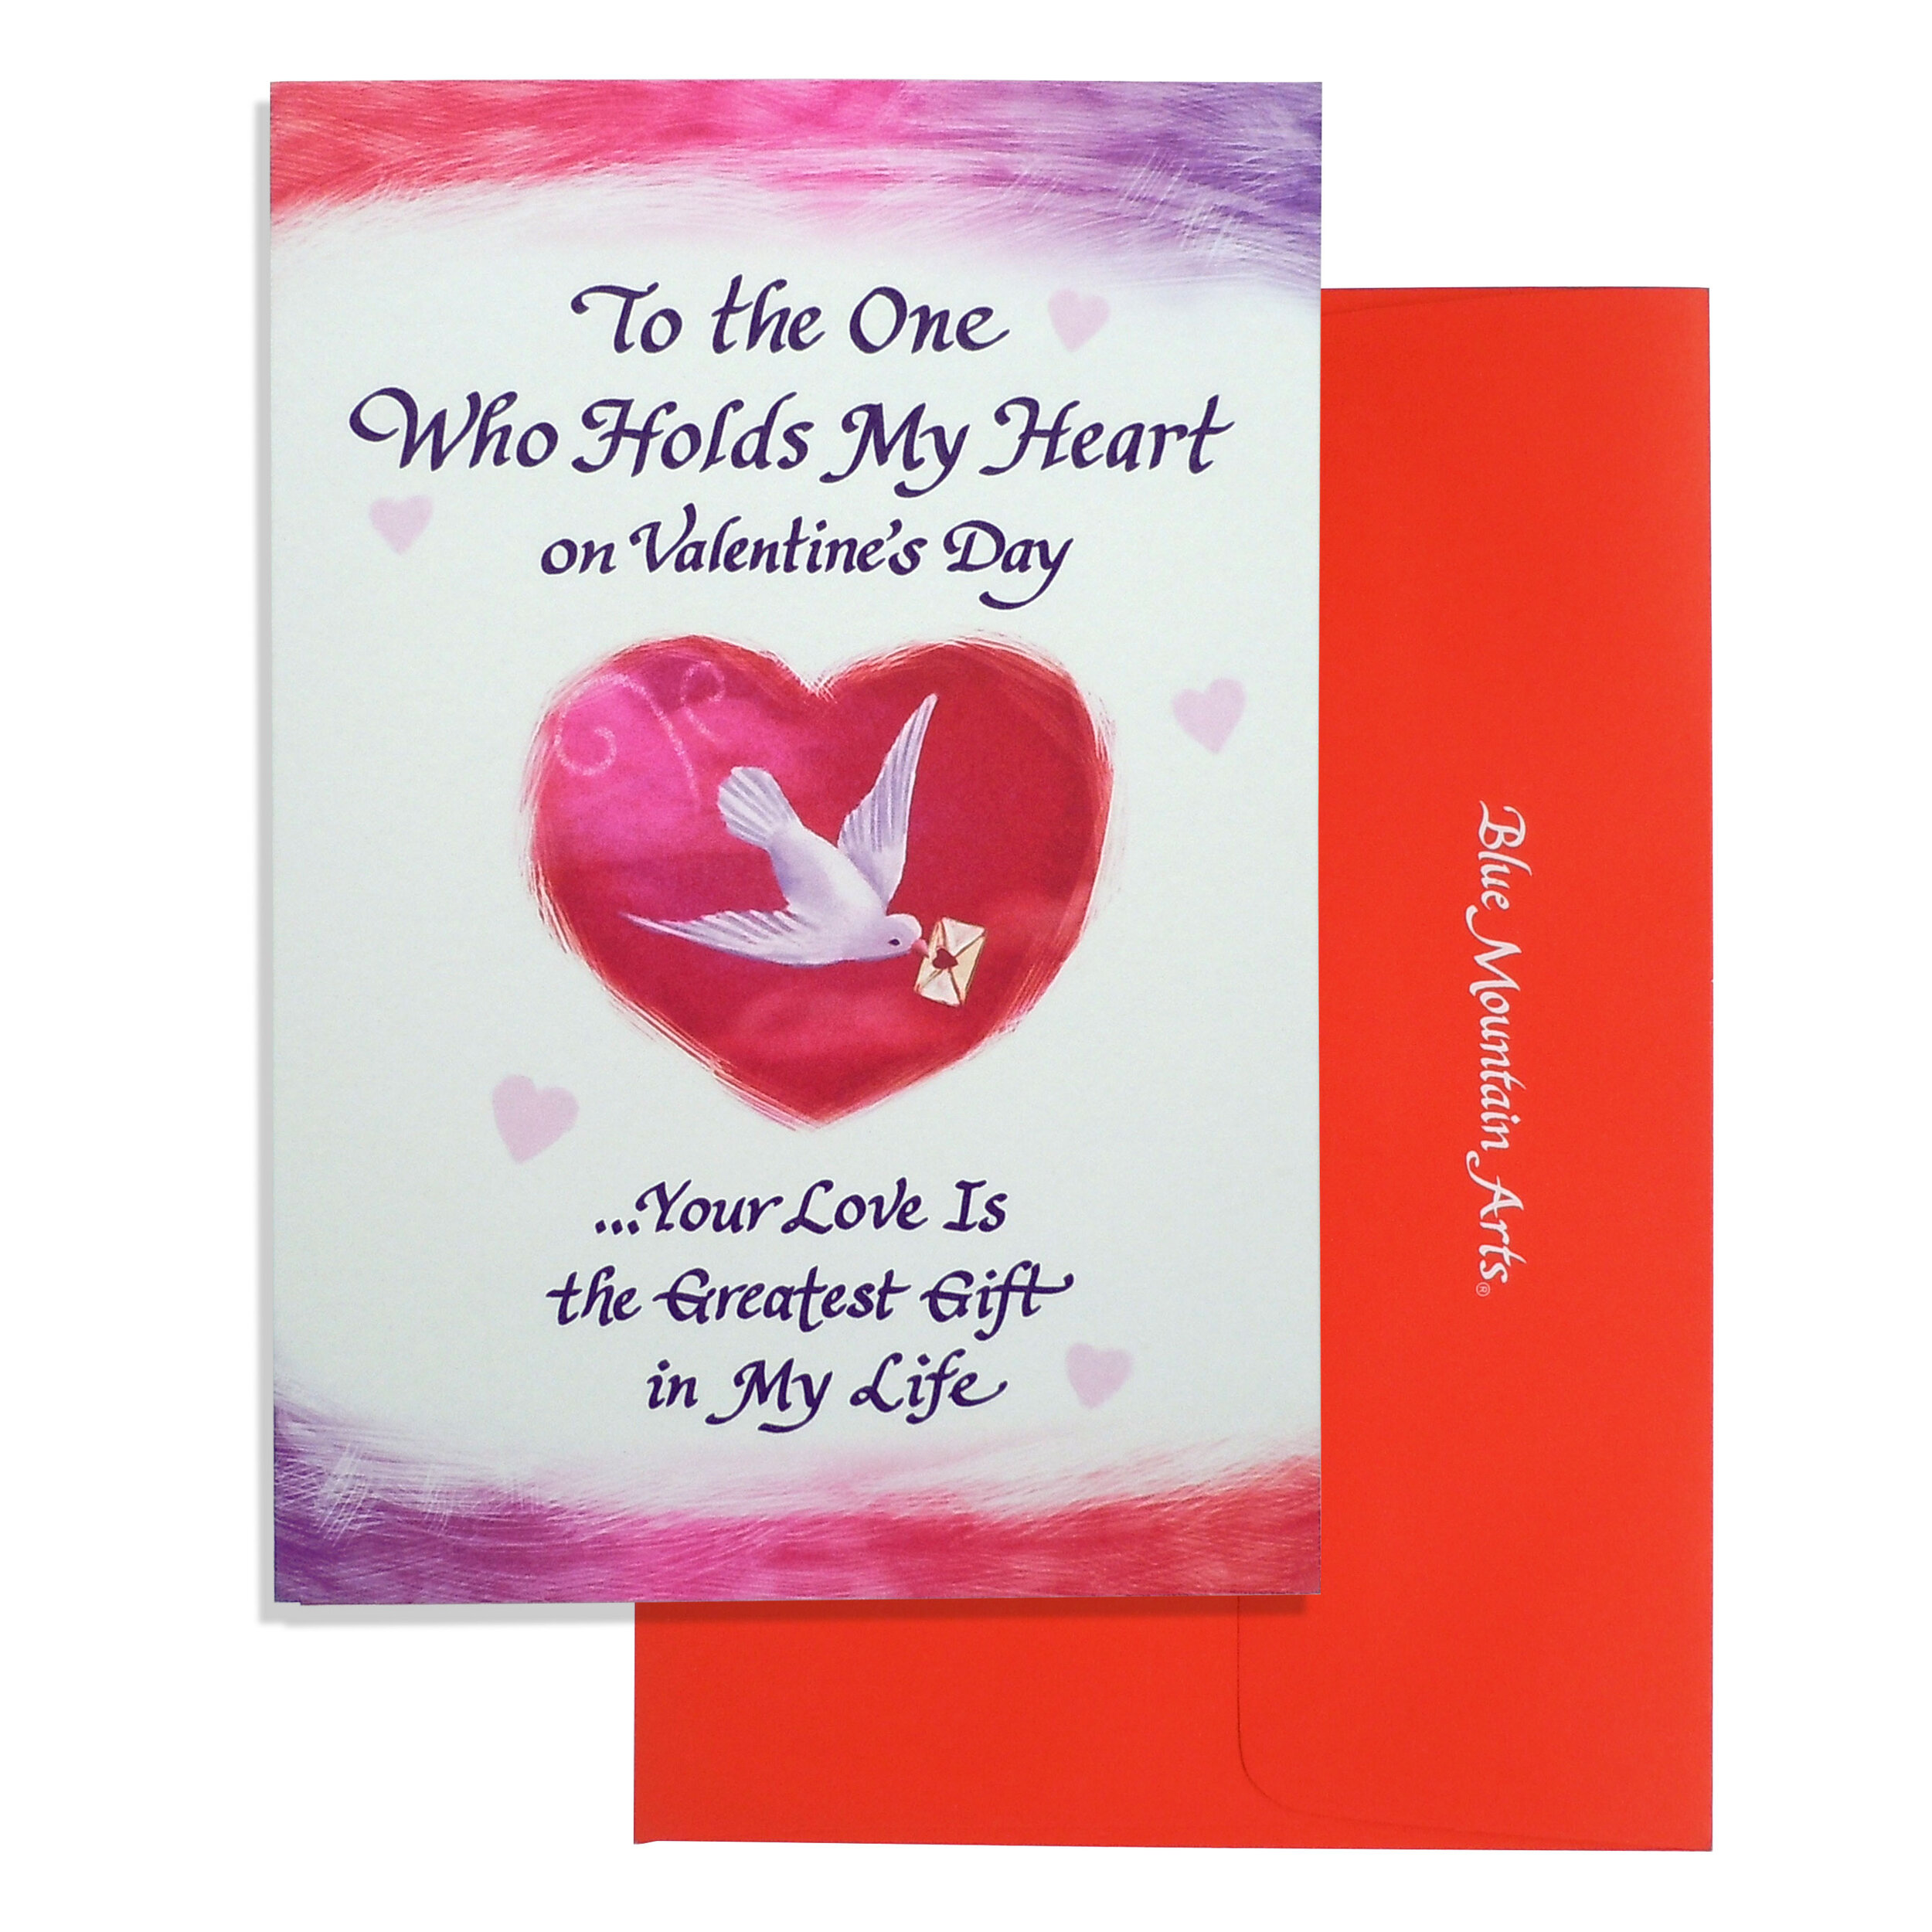 FOR MY LOVE Details about   Blue Mountain Arts Greeting Card DID YOU KNOW...Romance Card 